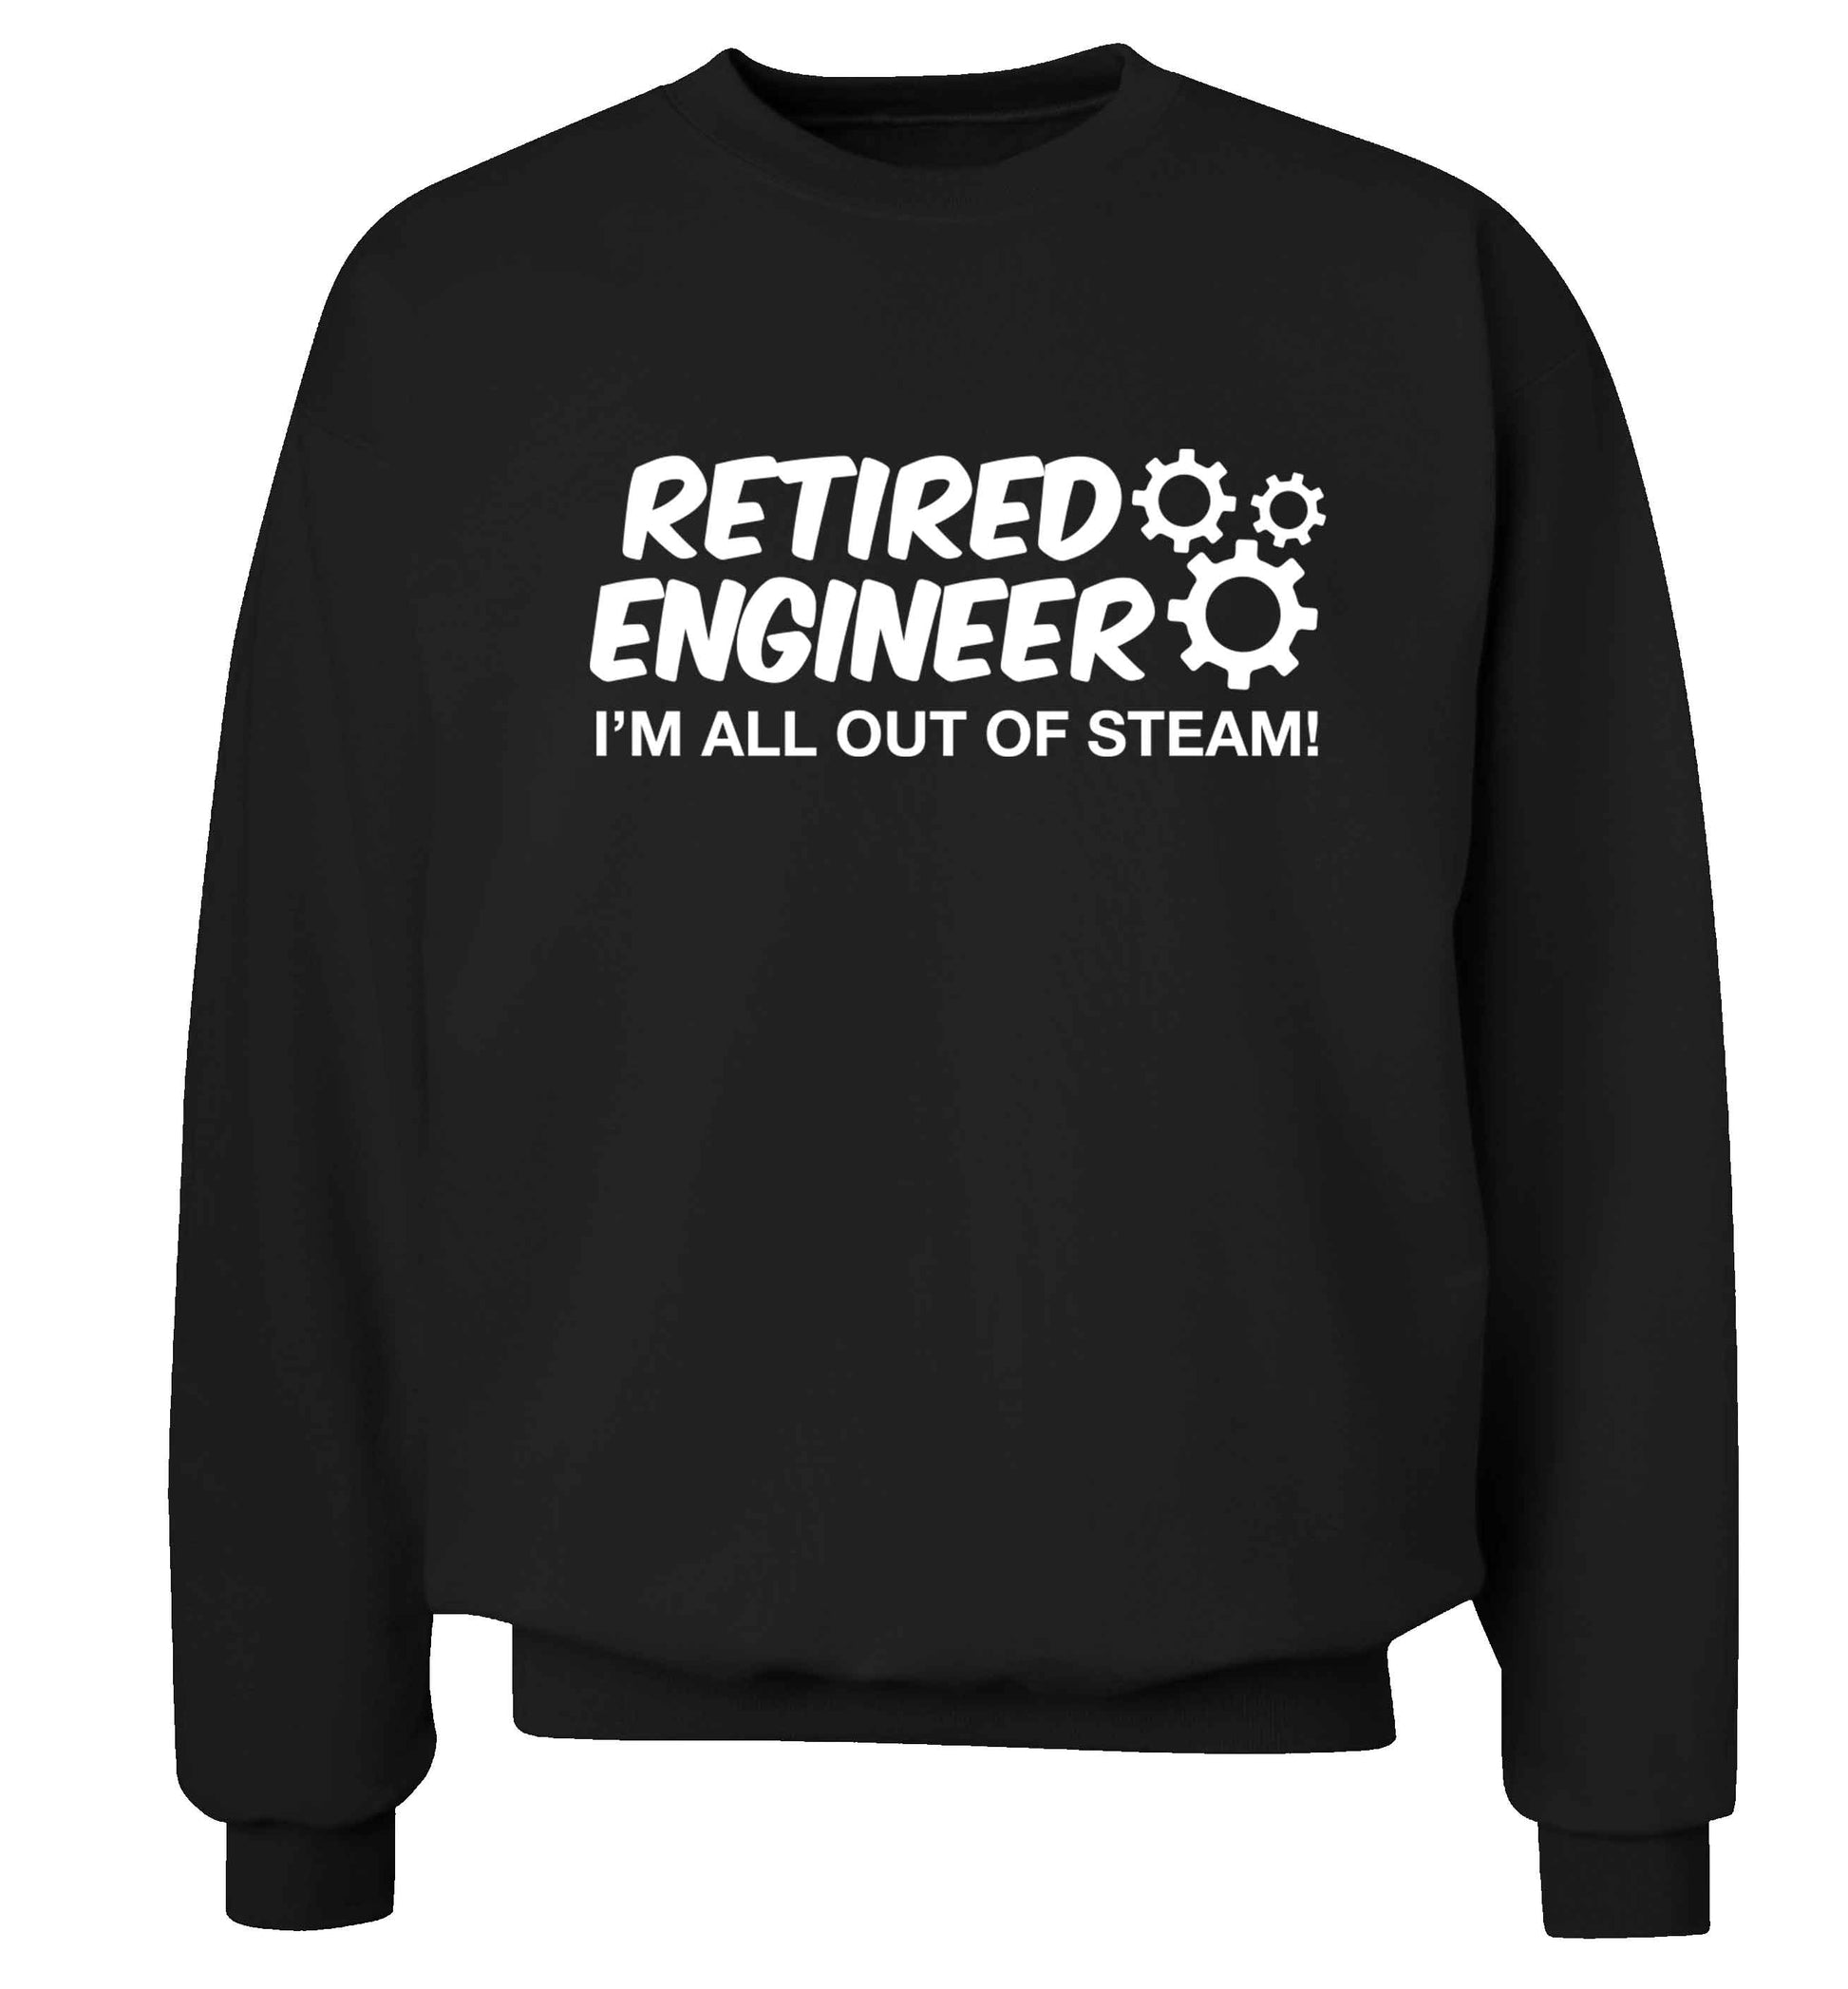 Retired engineer I'm all out of steam Adult's unisex black Sweater 2XL